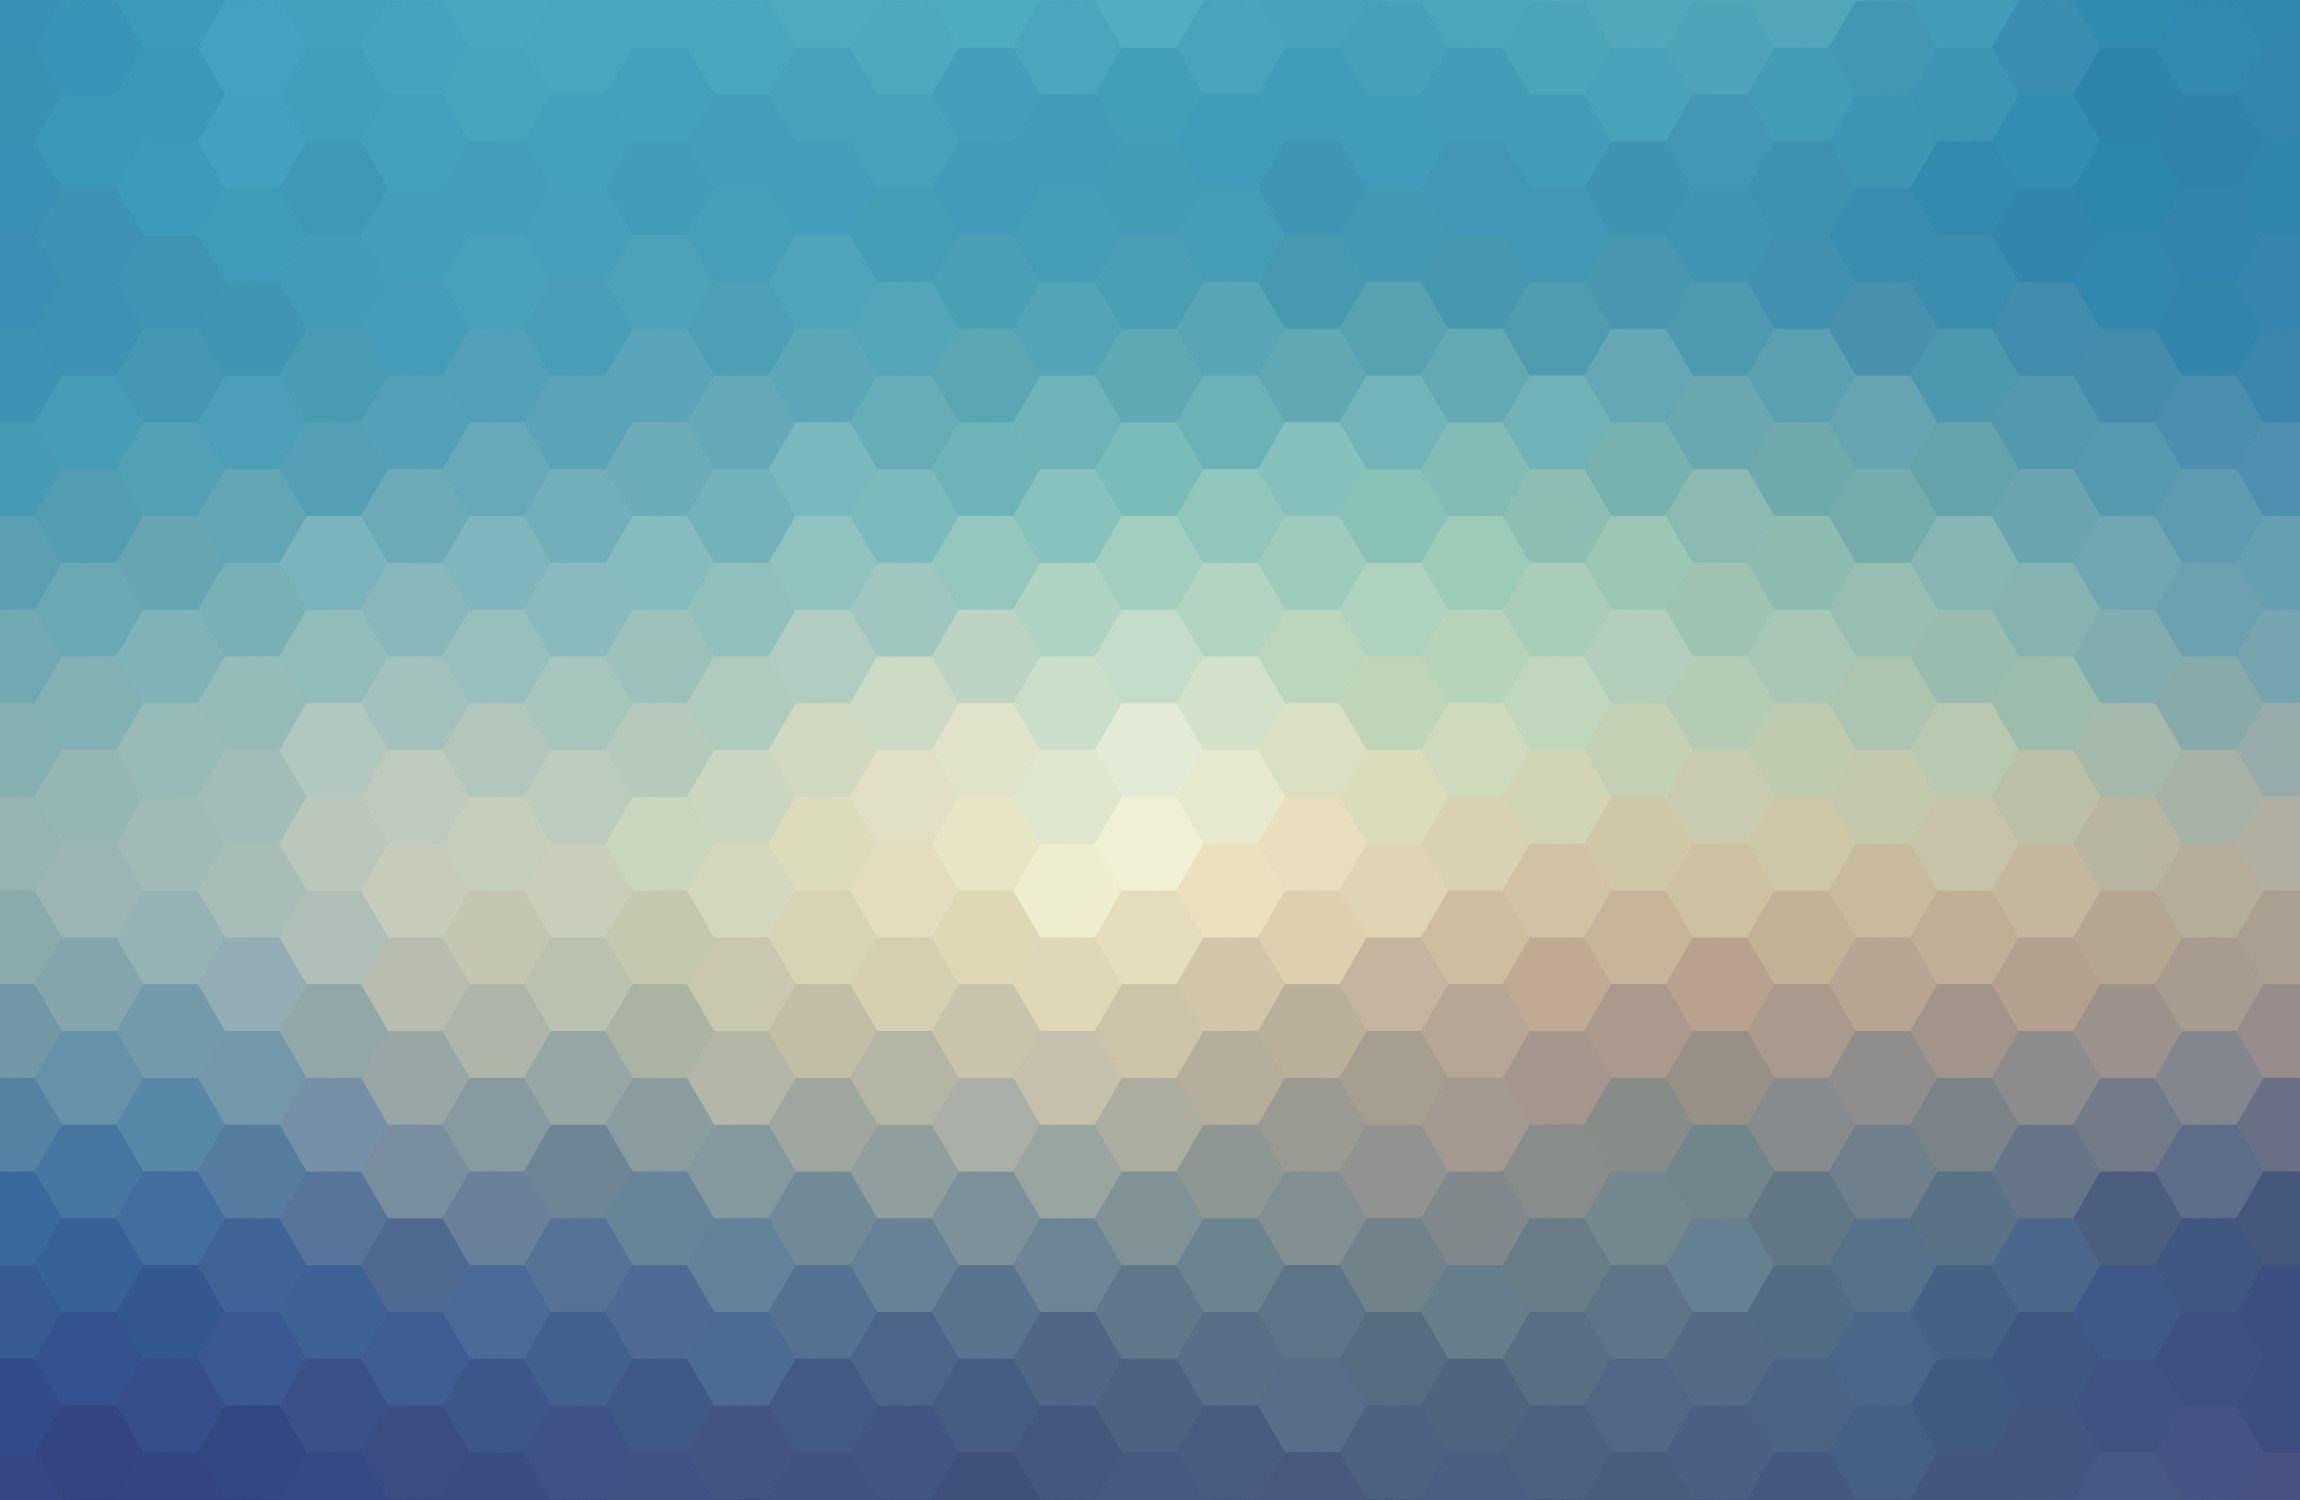 how to do I make a geometric gradient background like this